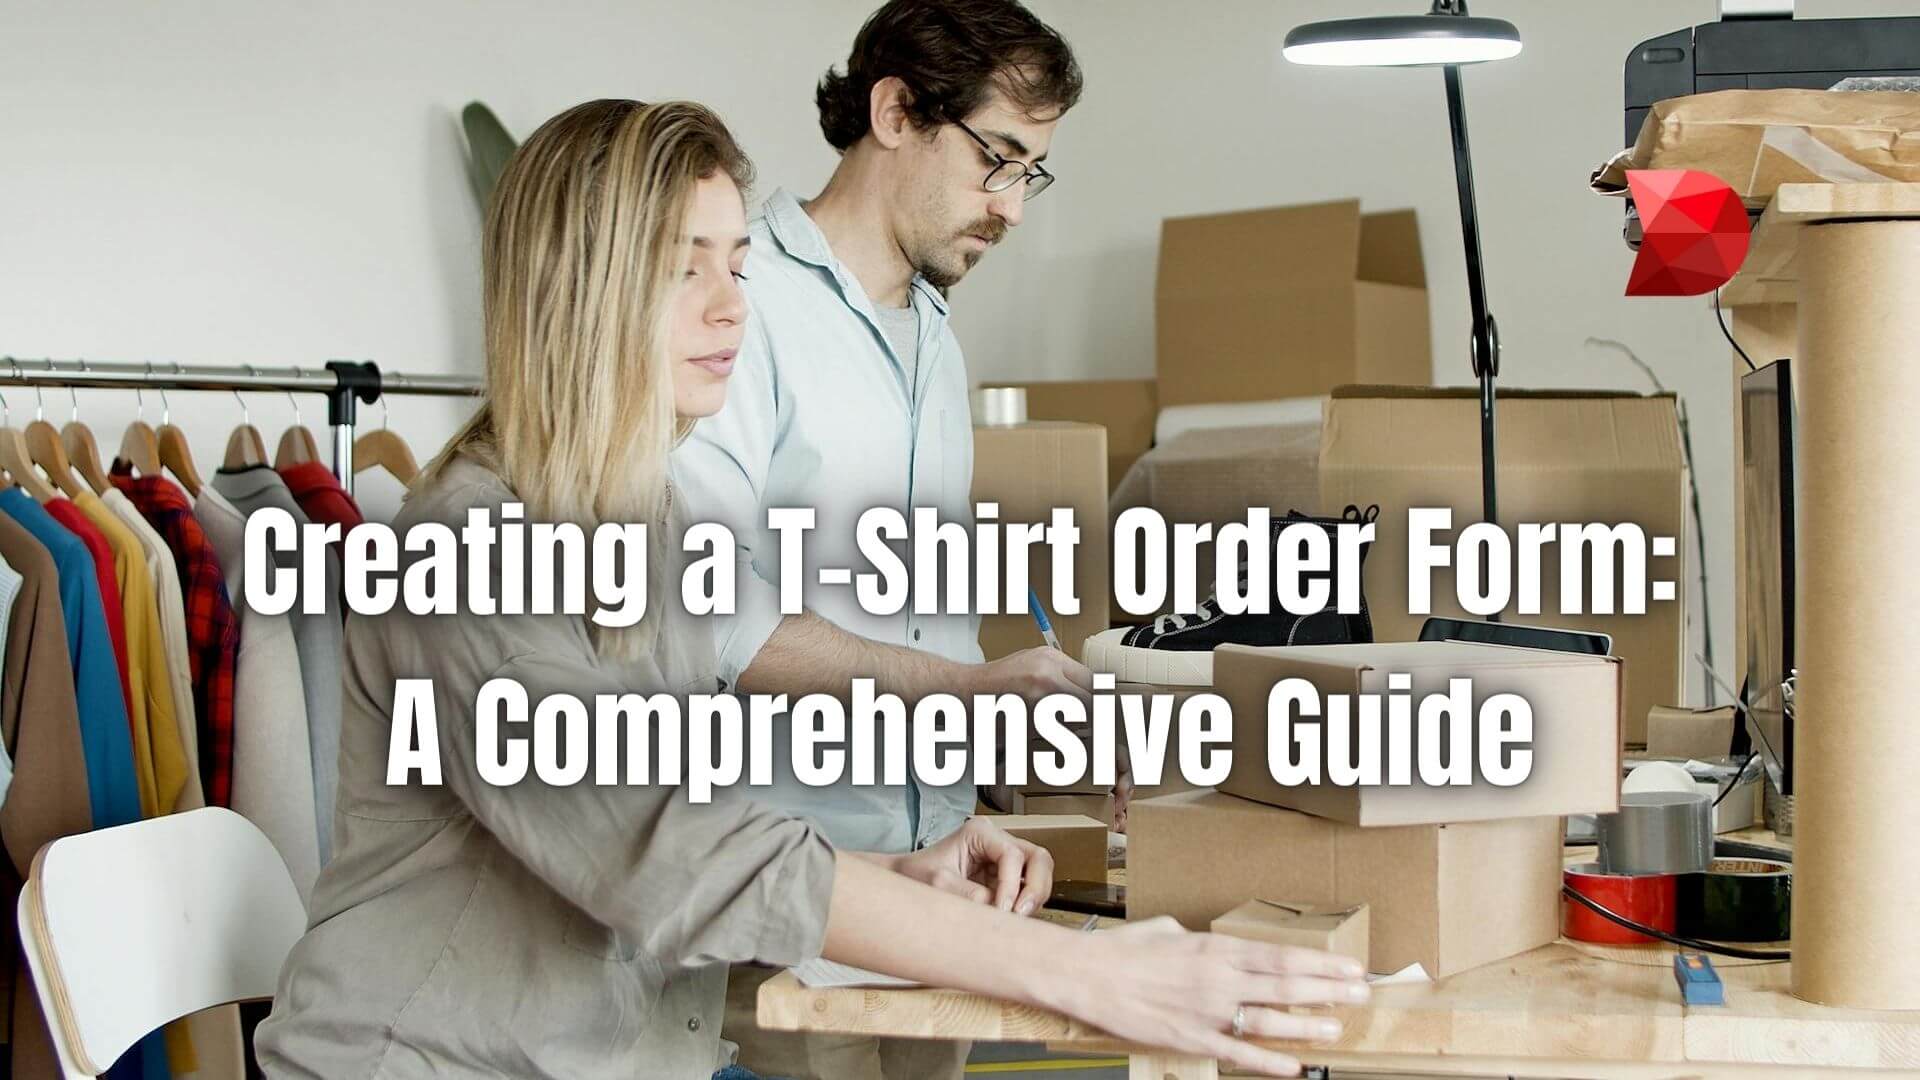 Streamline your process and boost efficiency today! Discover the essentials of crafting a T-Shirt Order Form with our comprehensive guide.